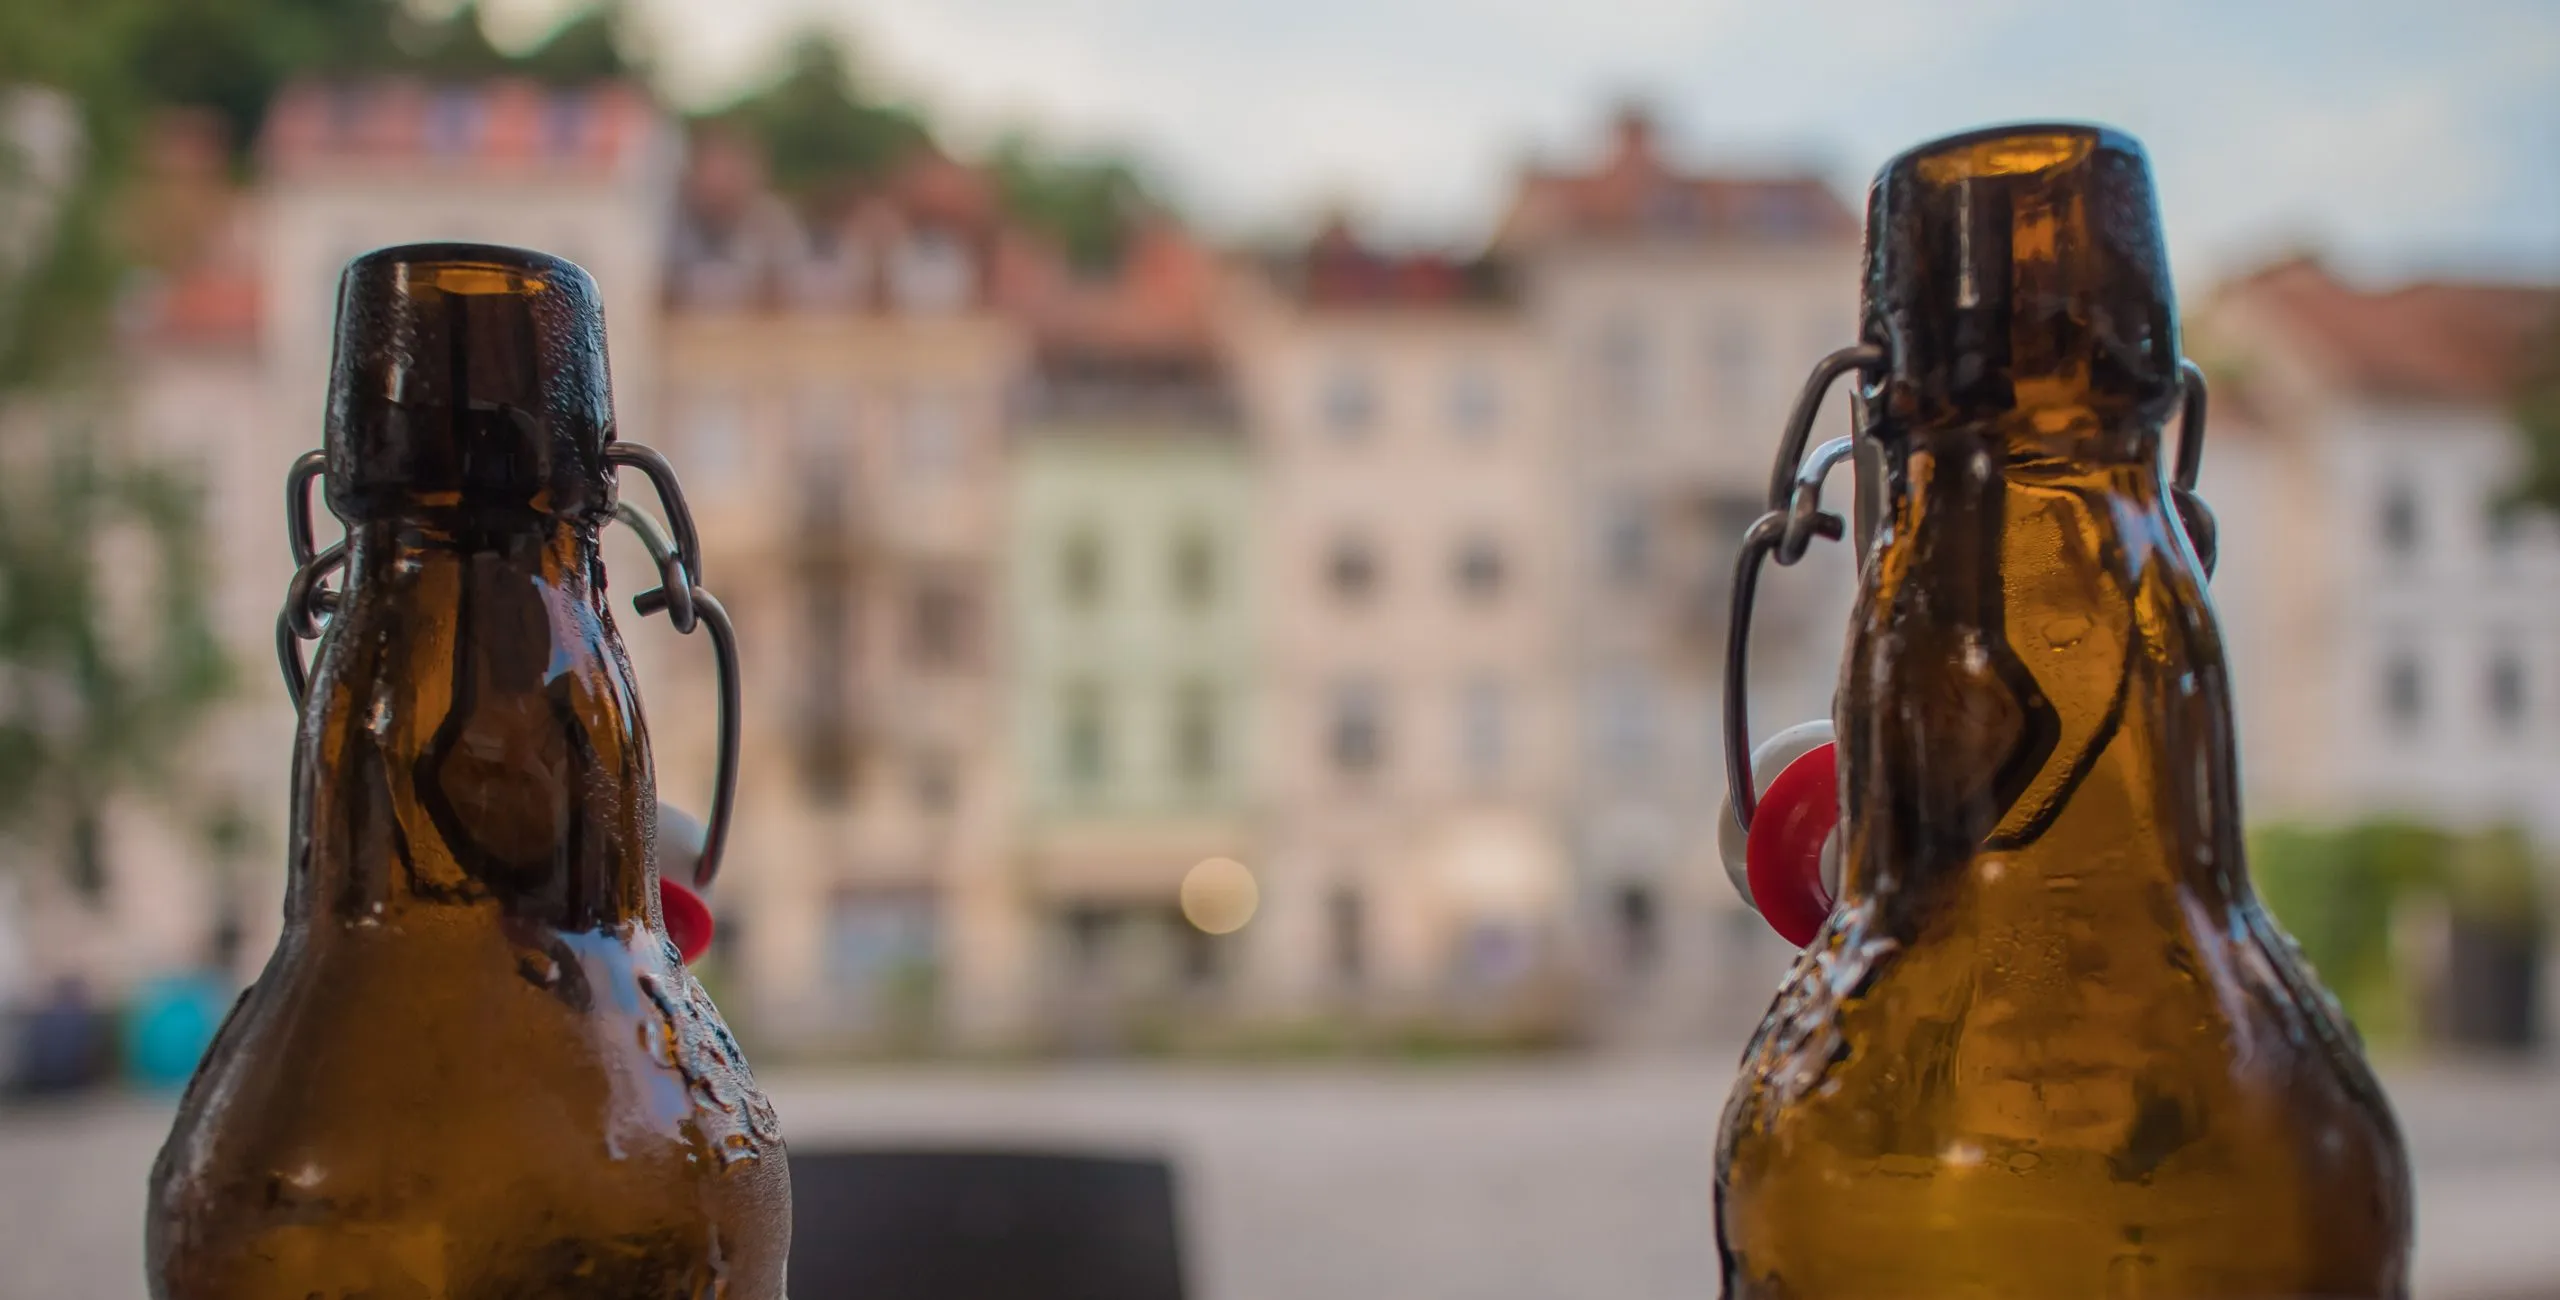 Two glass beer bottles with opened caps in front of picturesque Ljubljana houses next to a river in the evening.